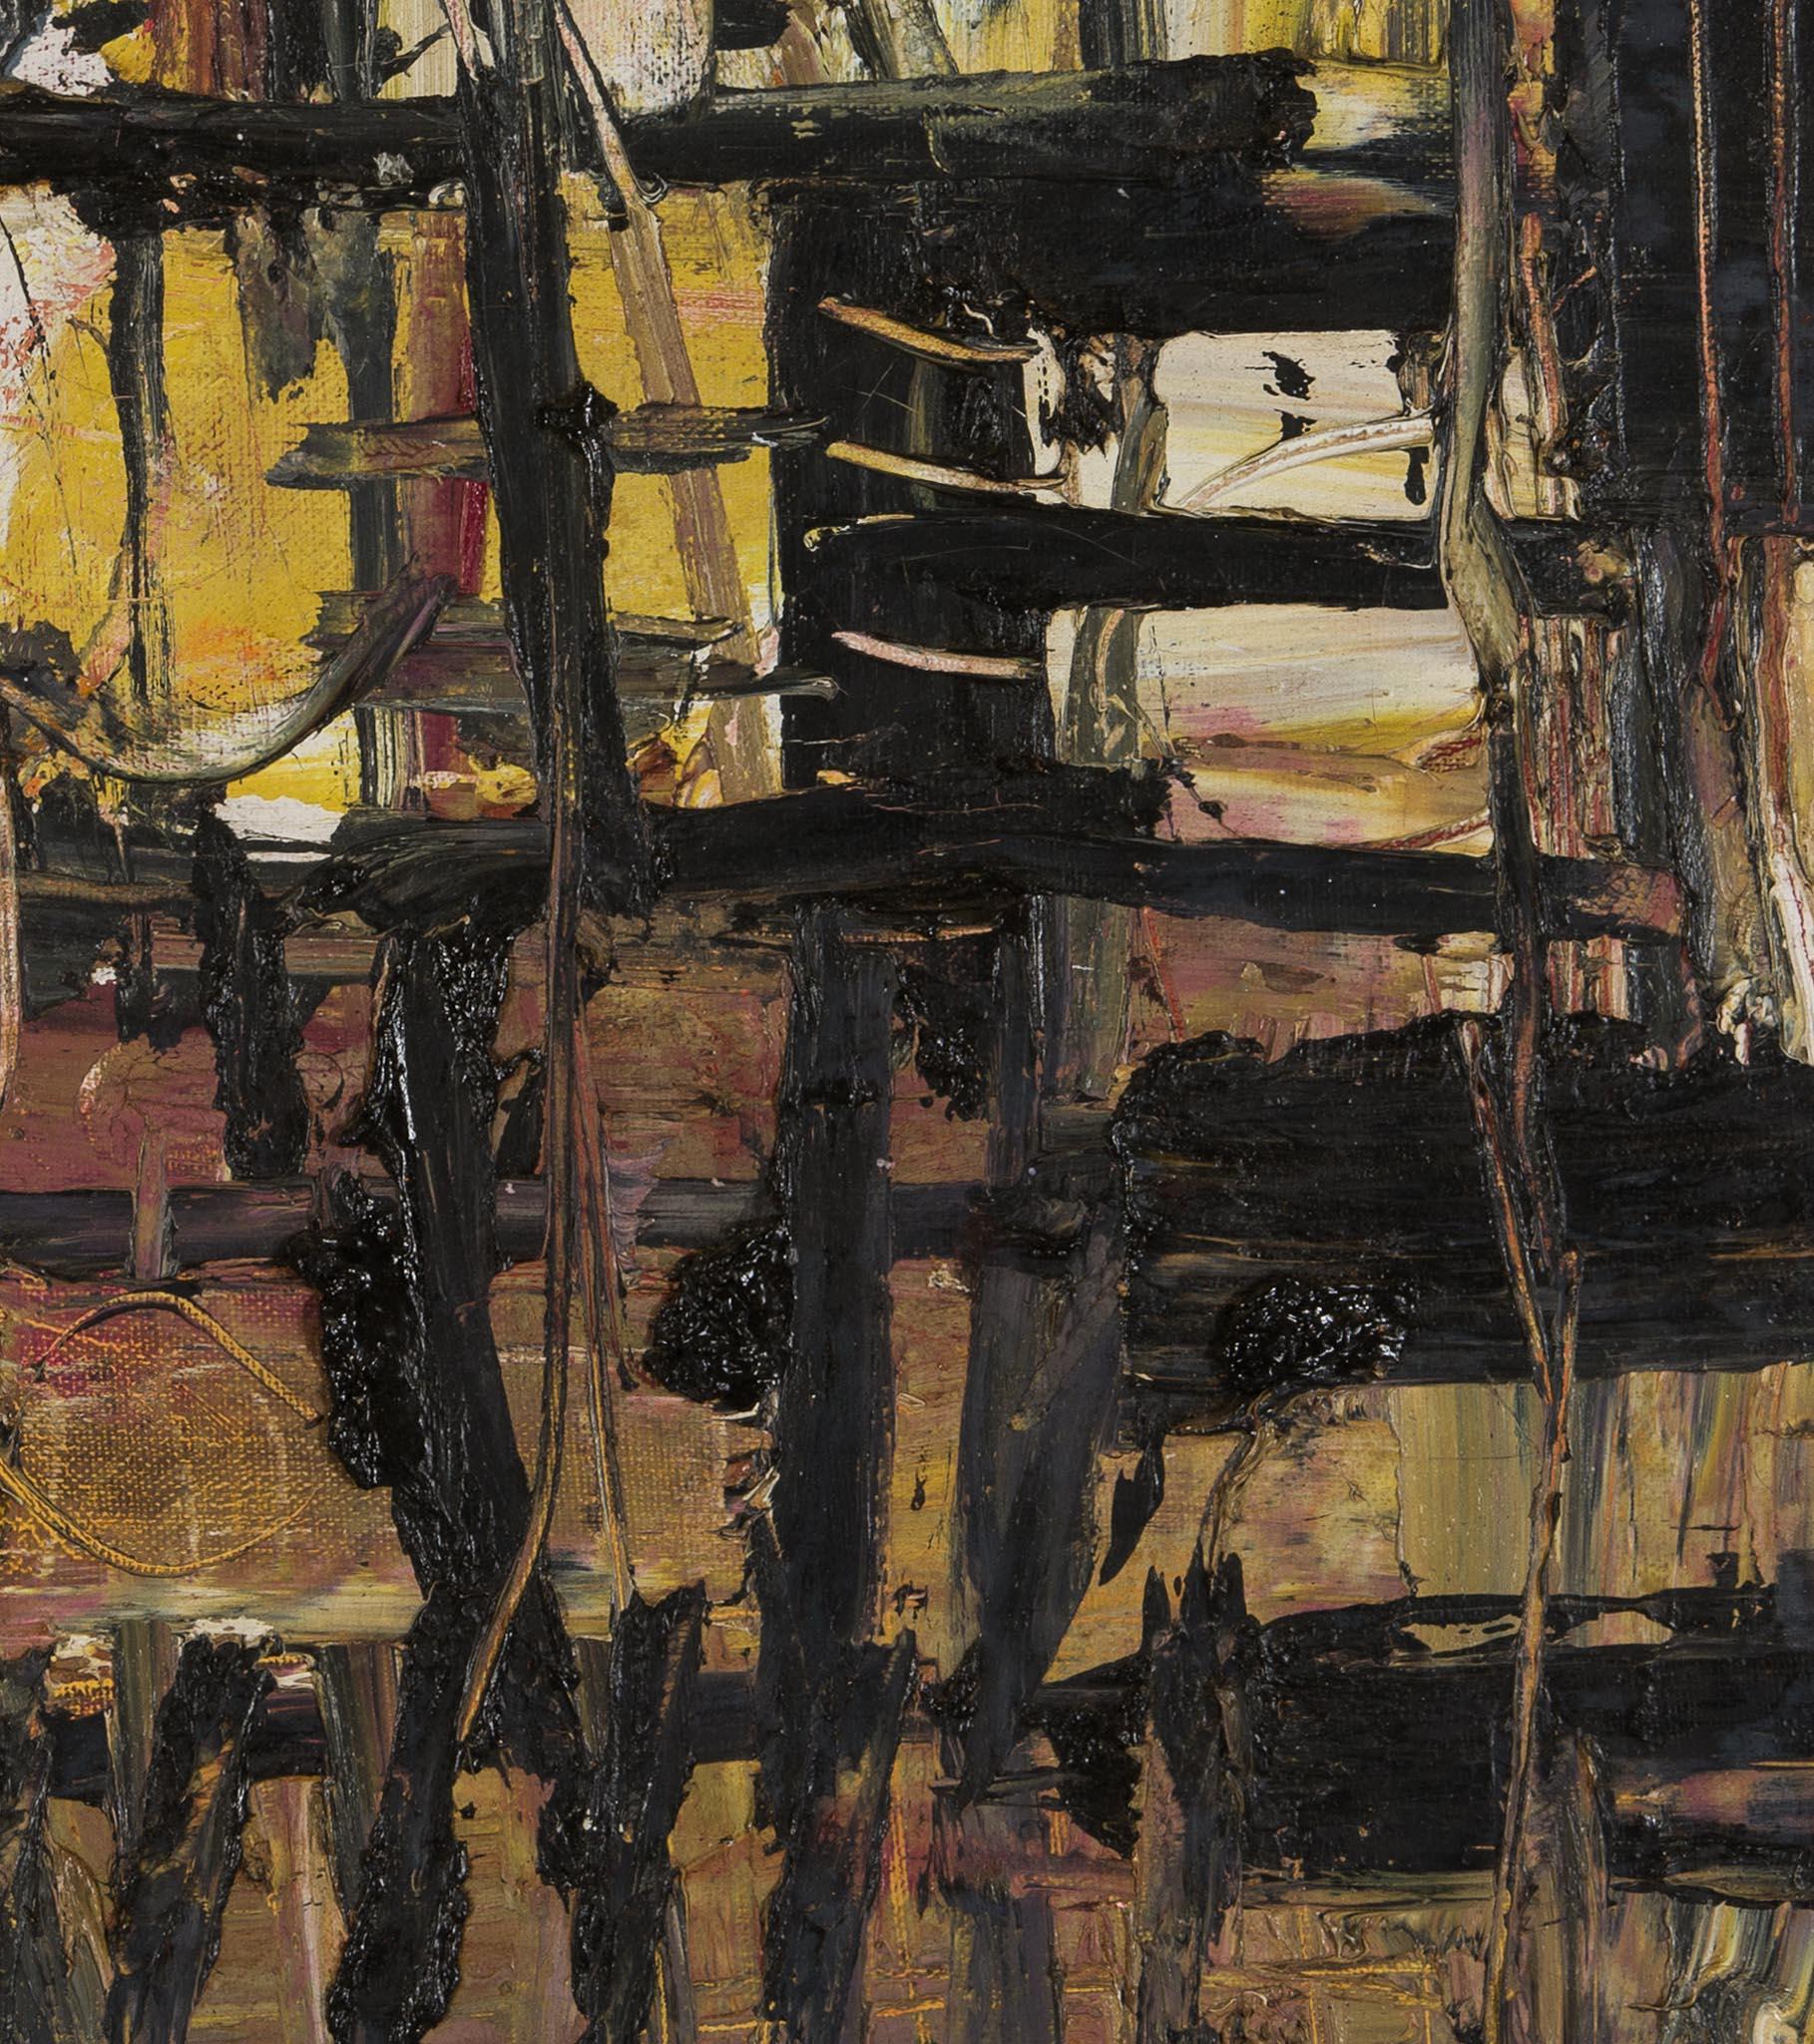 detail of an abstract painting with chaotic brushmarks in black, brown, and yellow